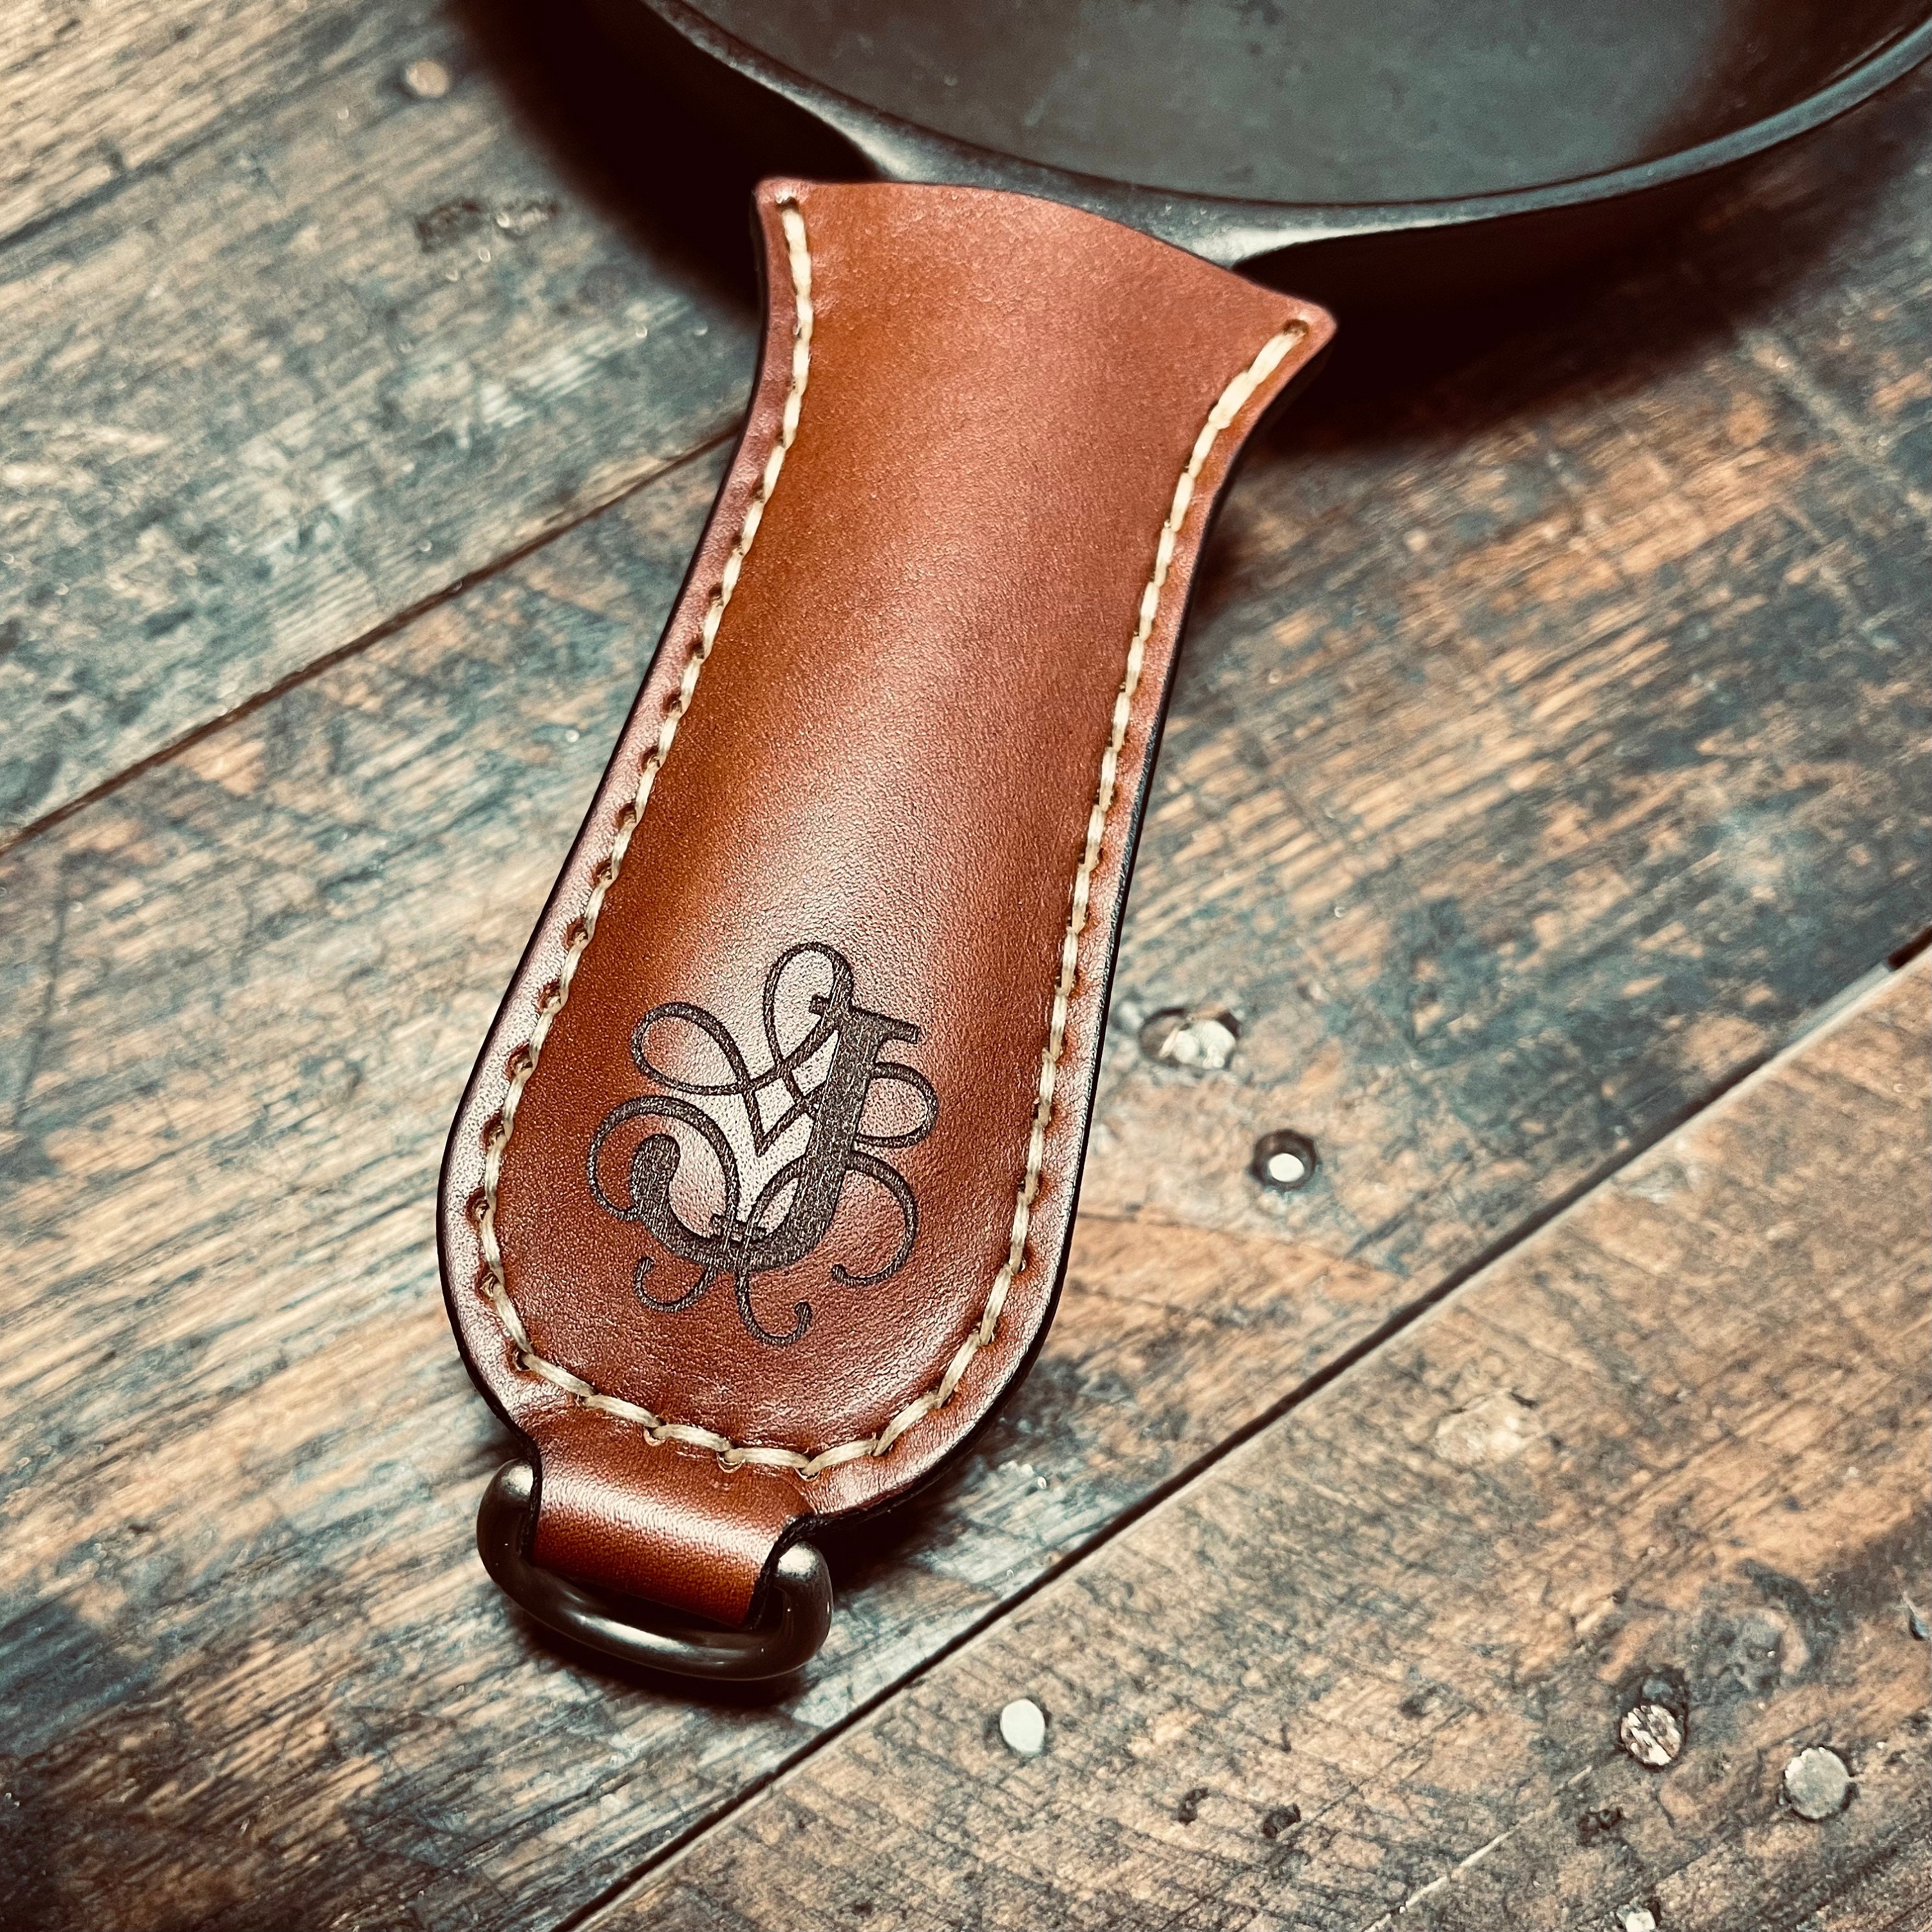 Hand Made/stitched Personalized Leather Handle Cover for Cast Iron